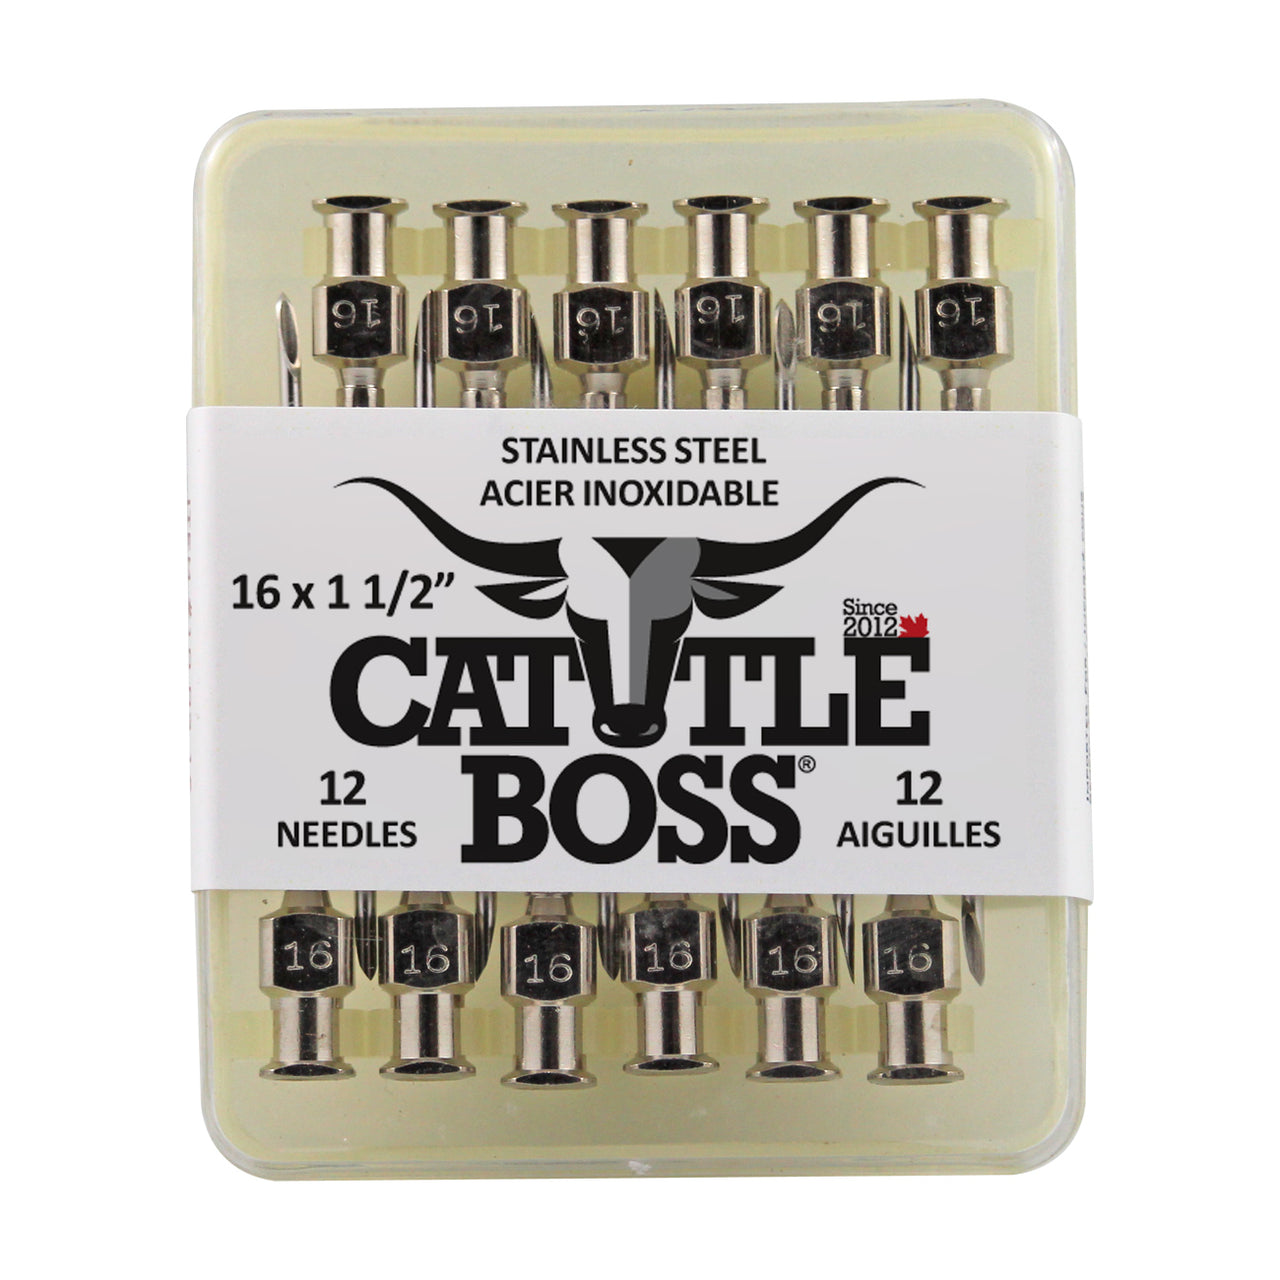 Cattle Boss Stainless Steel Hub Needle (12 Pack) 16X1 1/2 - Drug Administration Cattle Boss - Canada